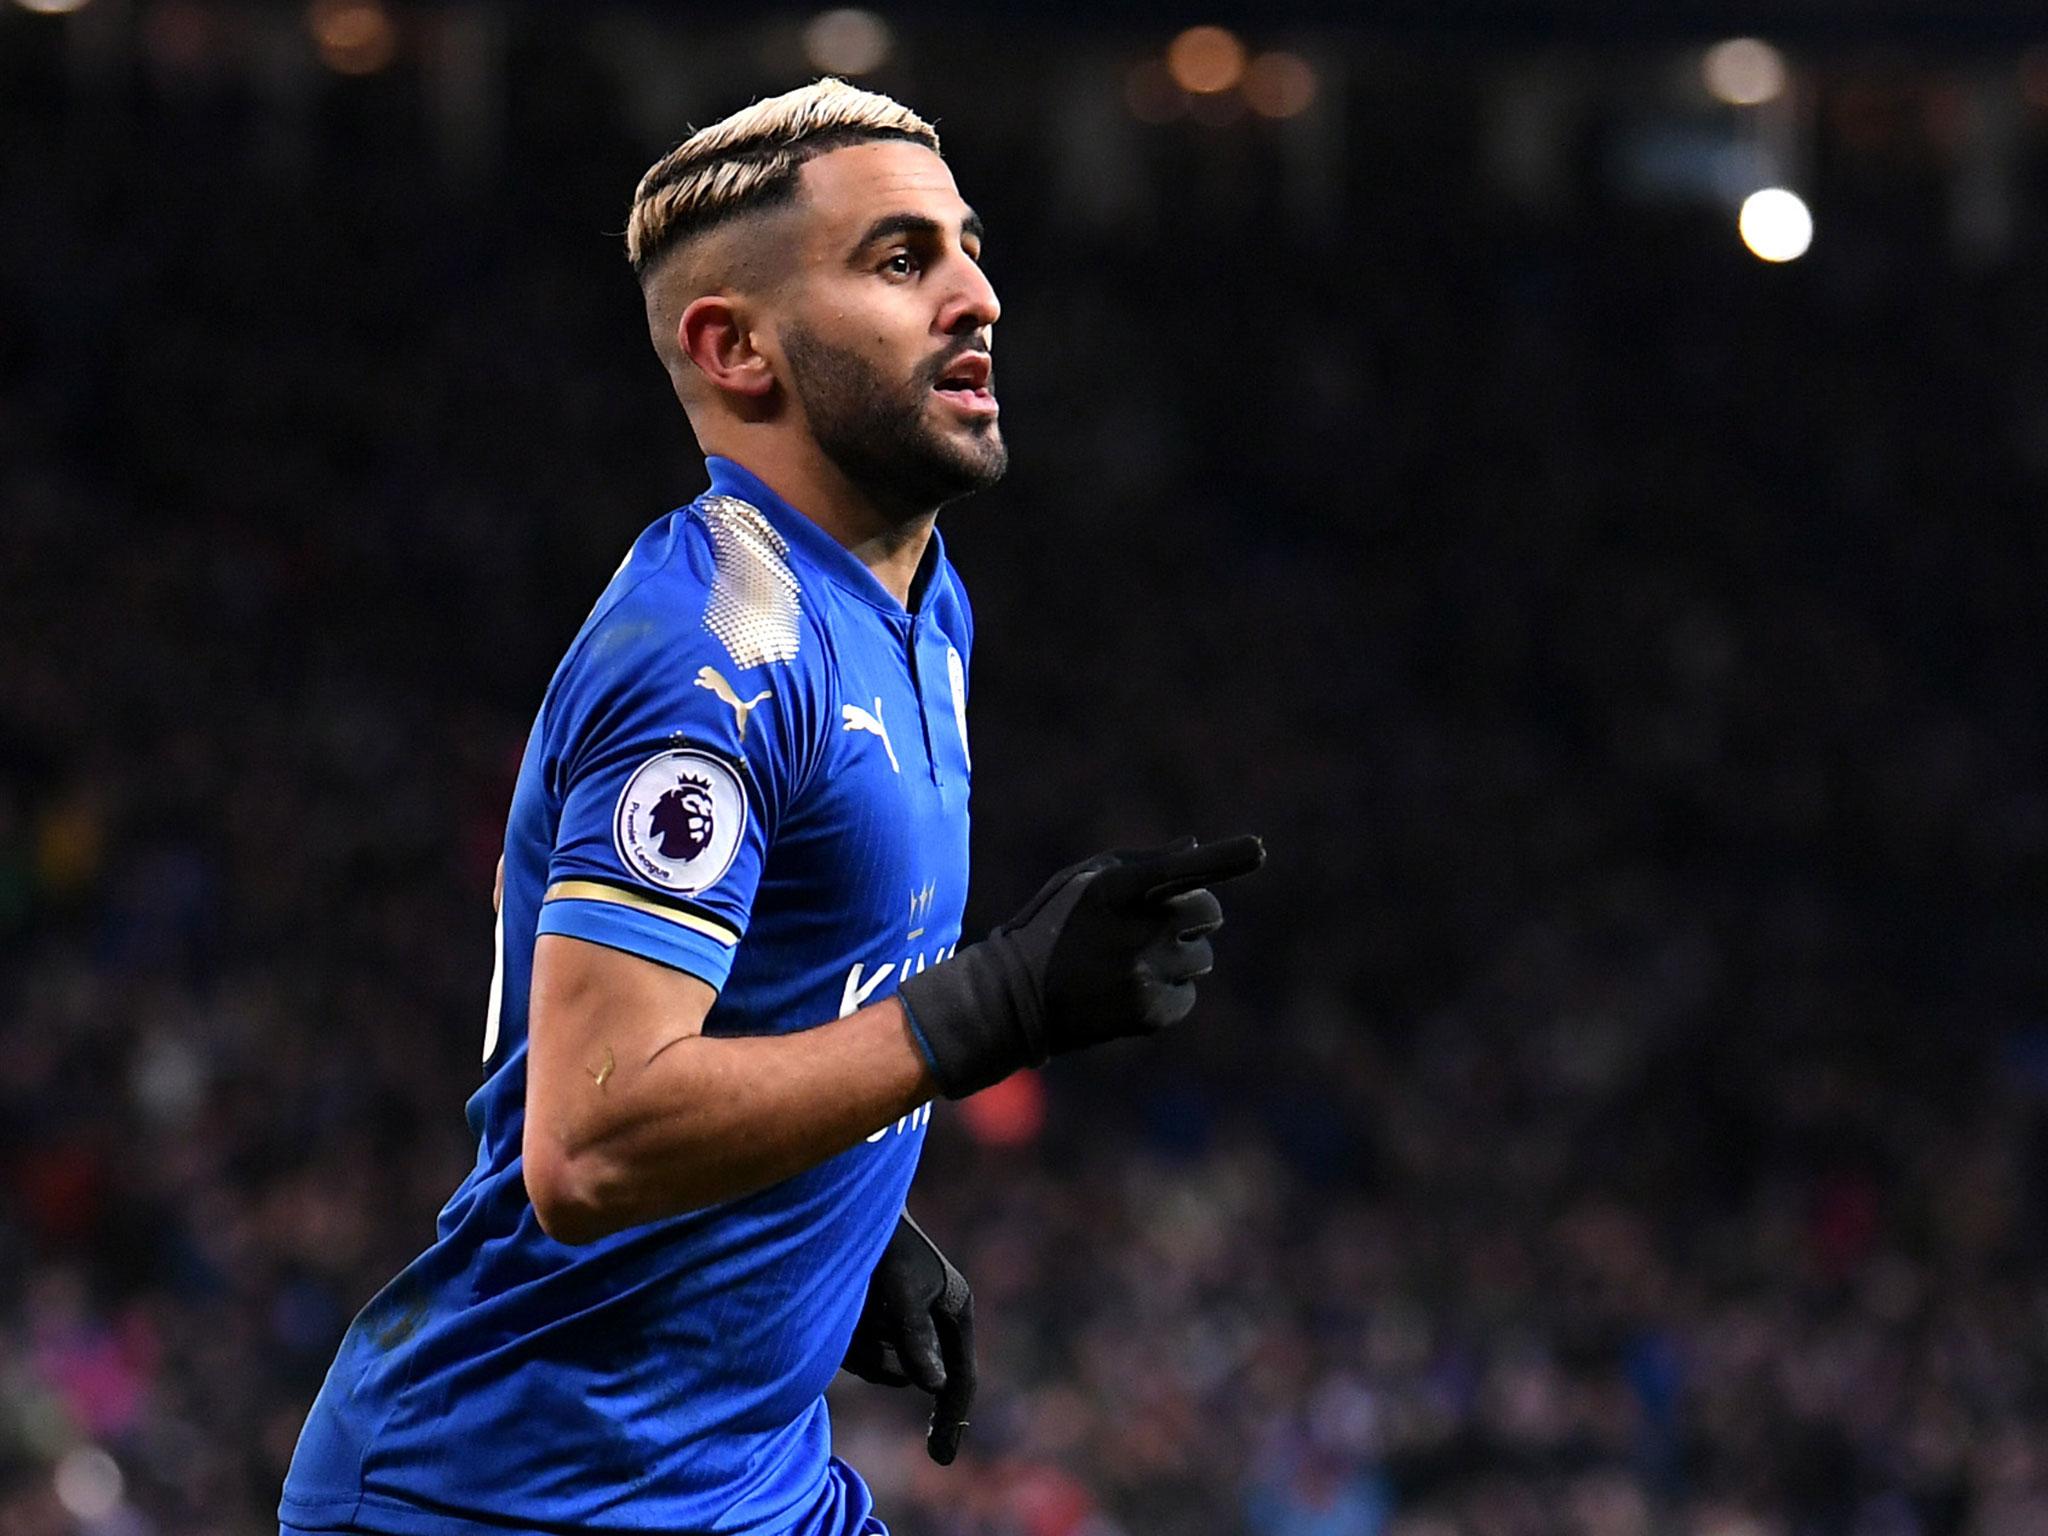 Riyad Mahrez has not played for Leicester since his rejected move to Manchester City